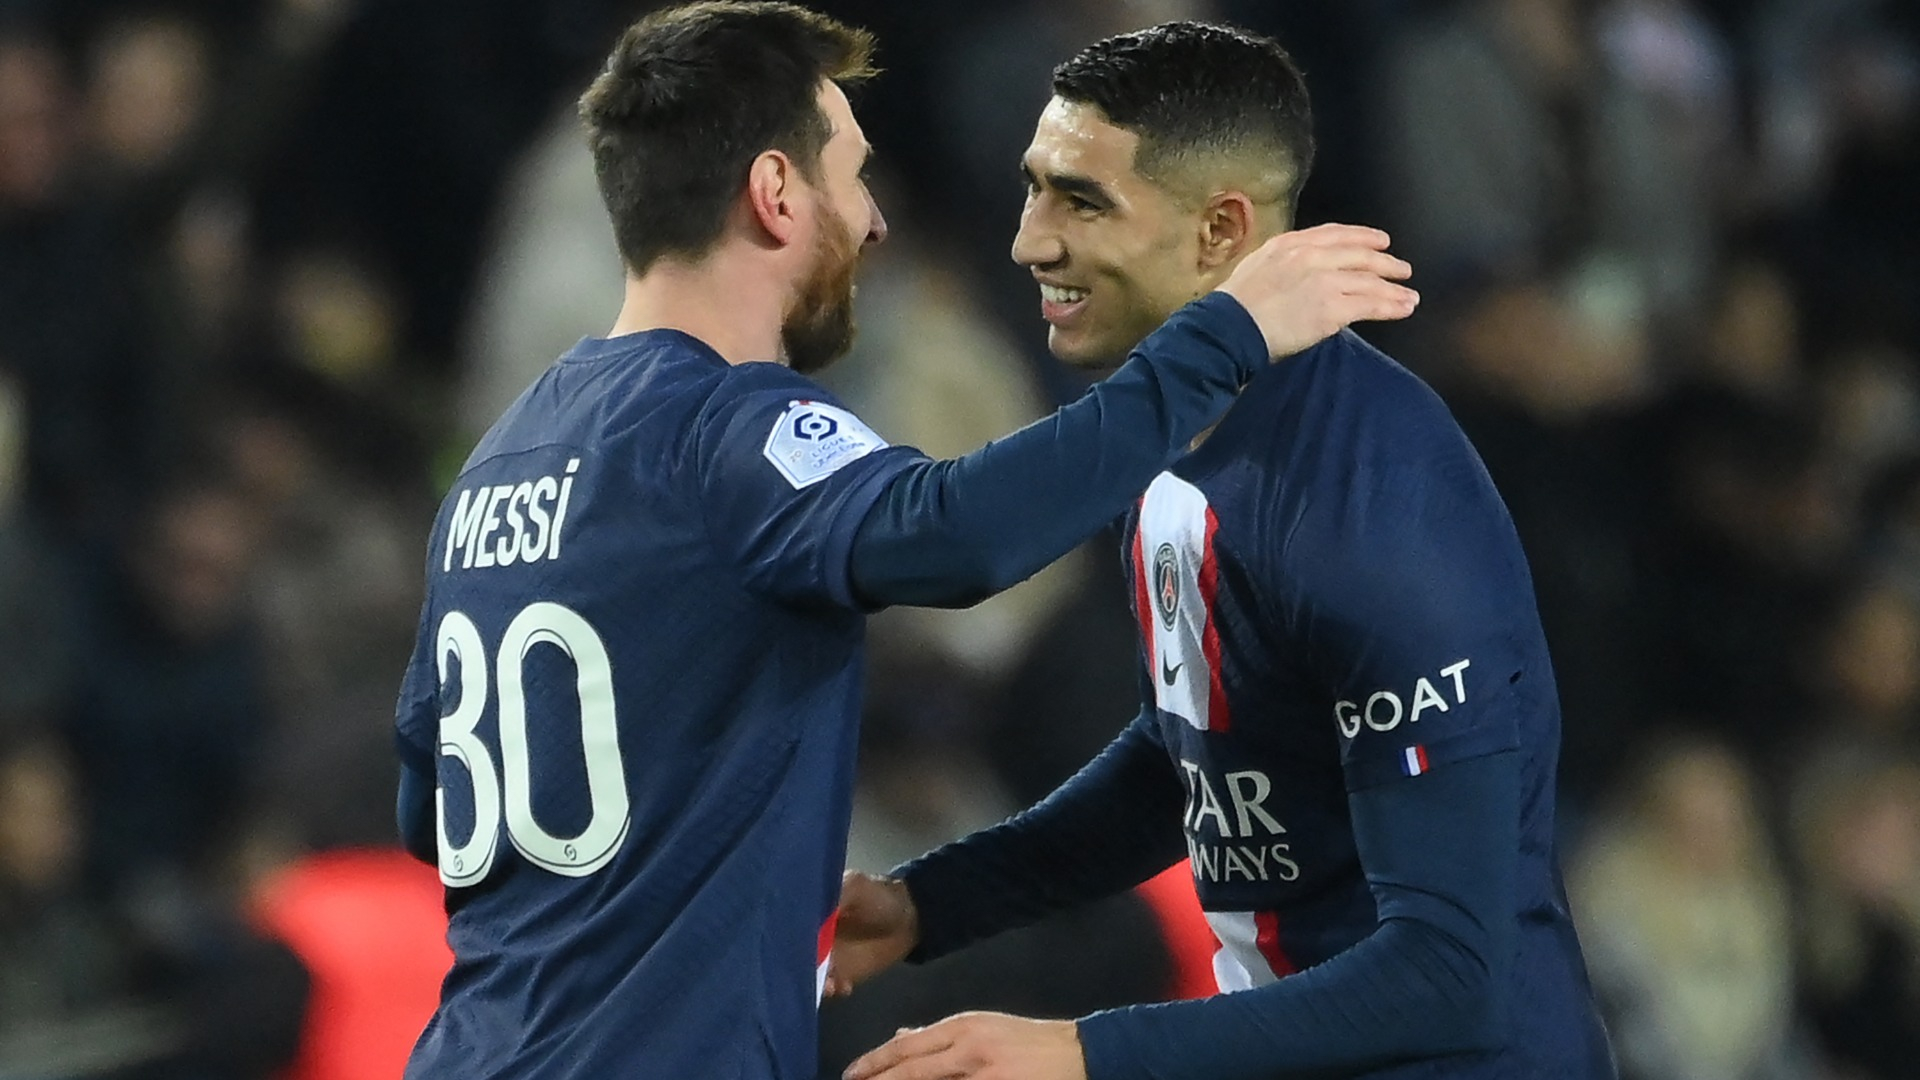 Achraf Hakimi, Lionel Messi Have Improved Chemistry, Ex-Player Says